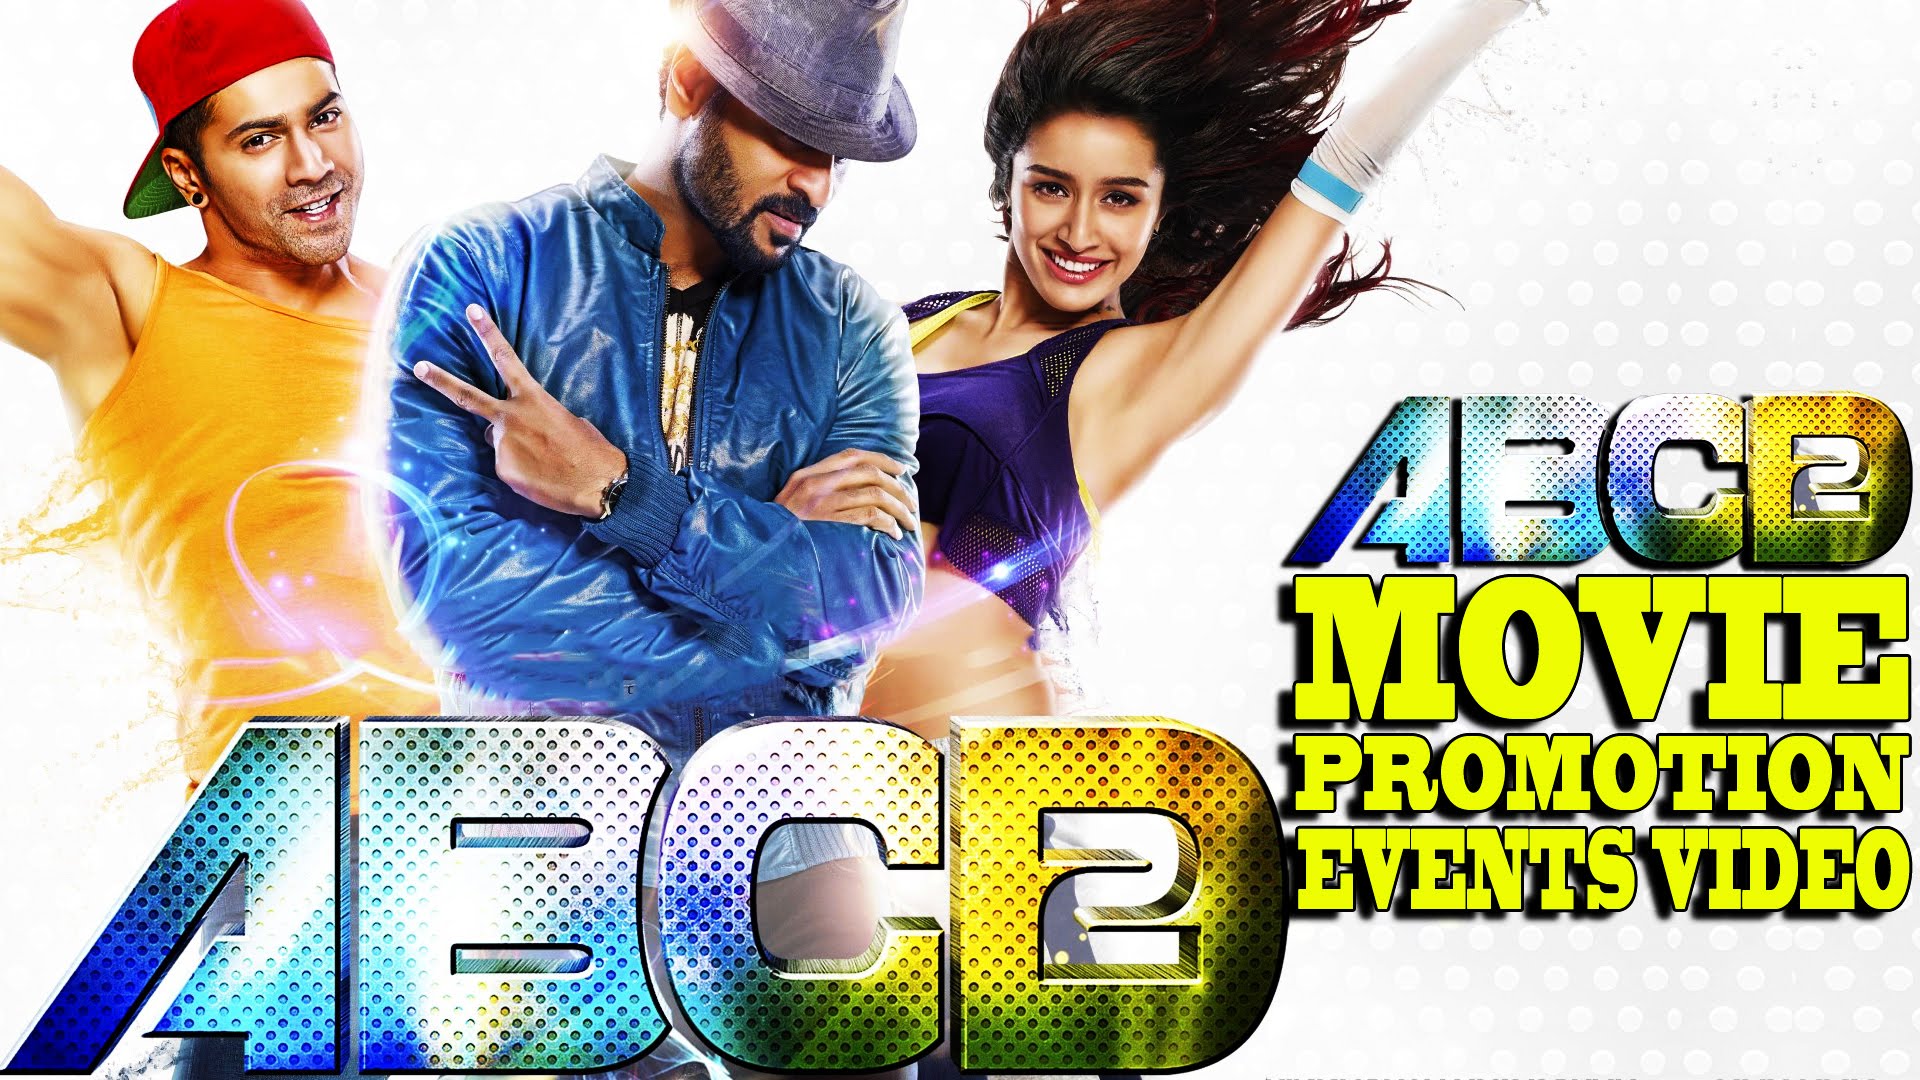 abcd full movie in tamil hd 1080p free download